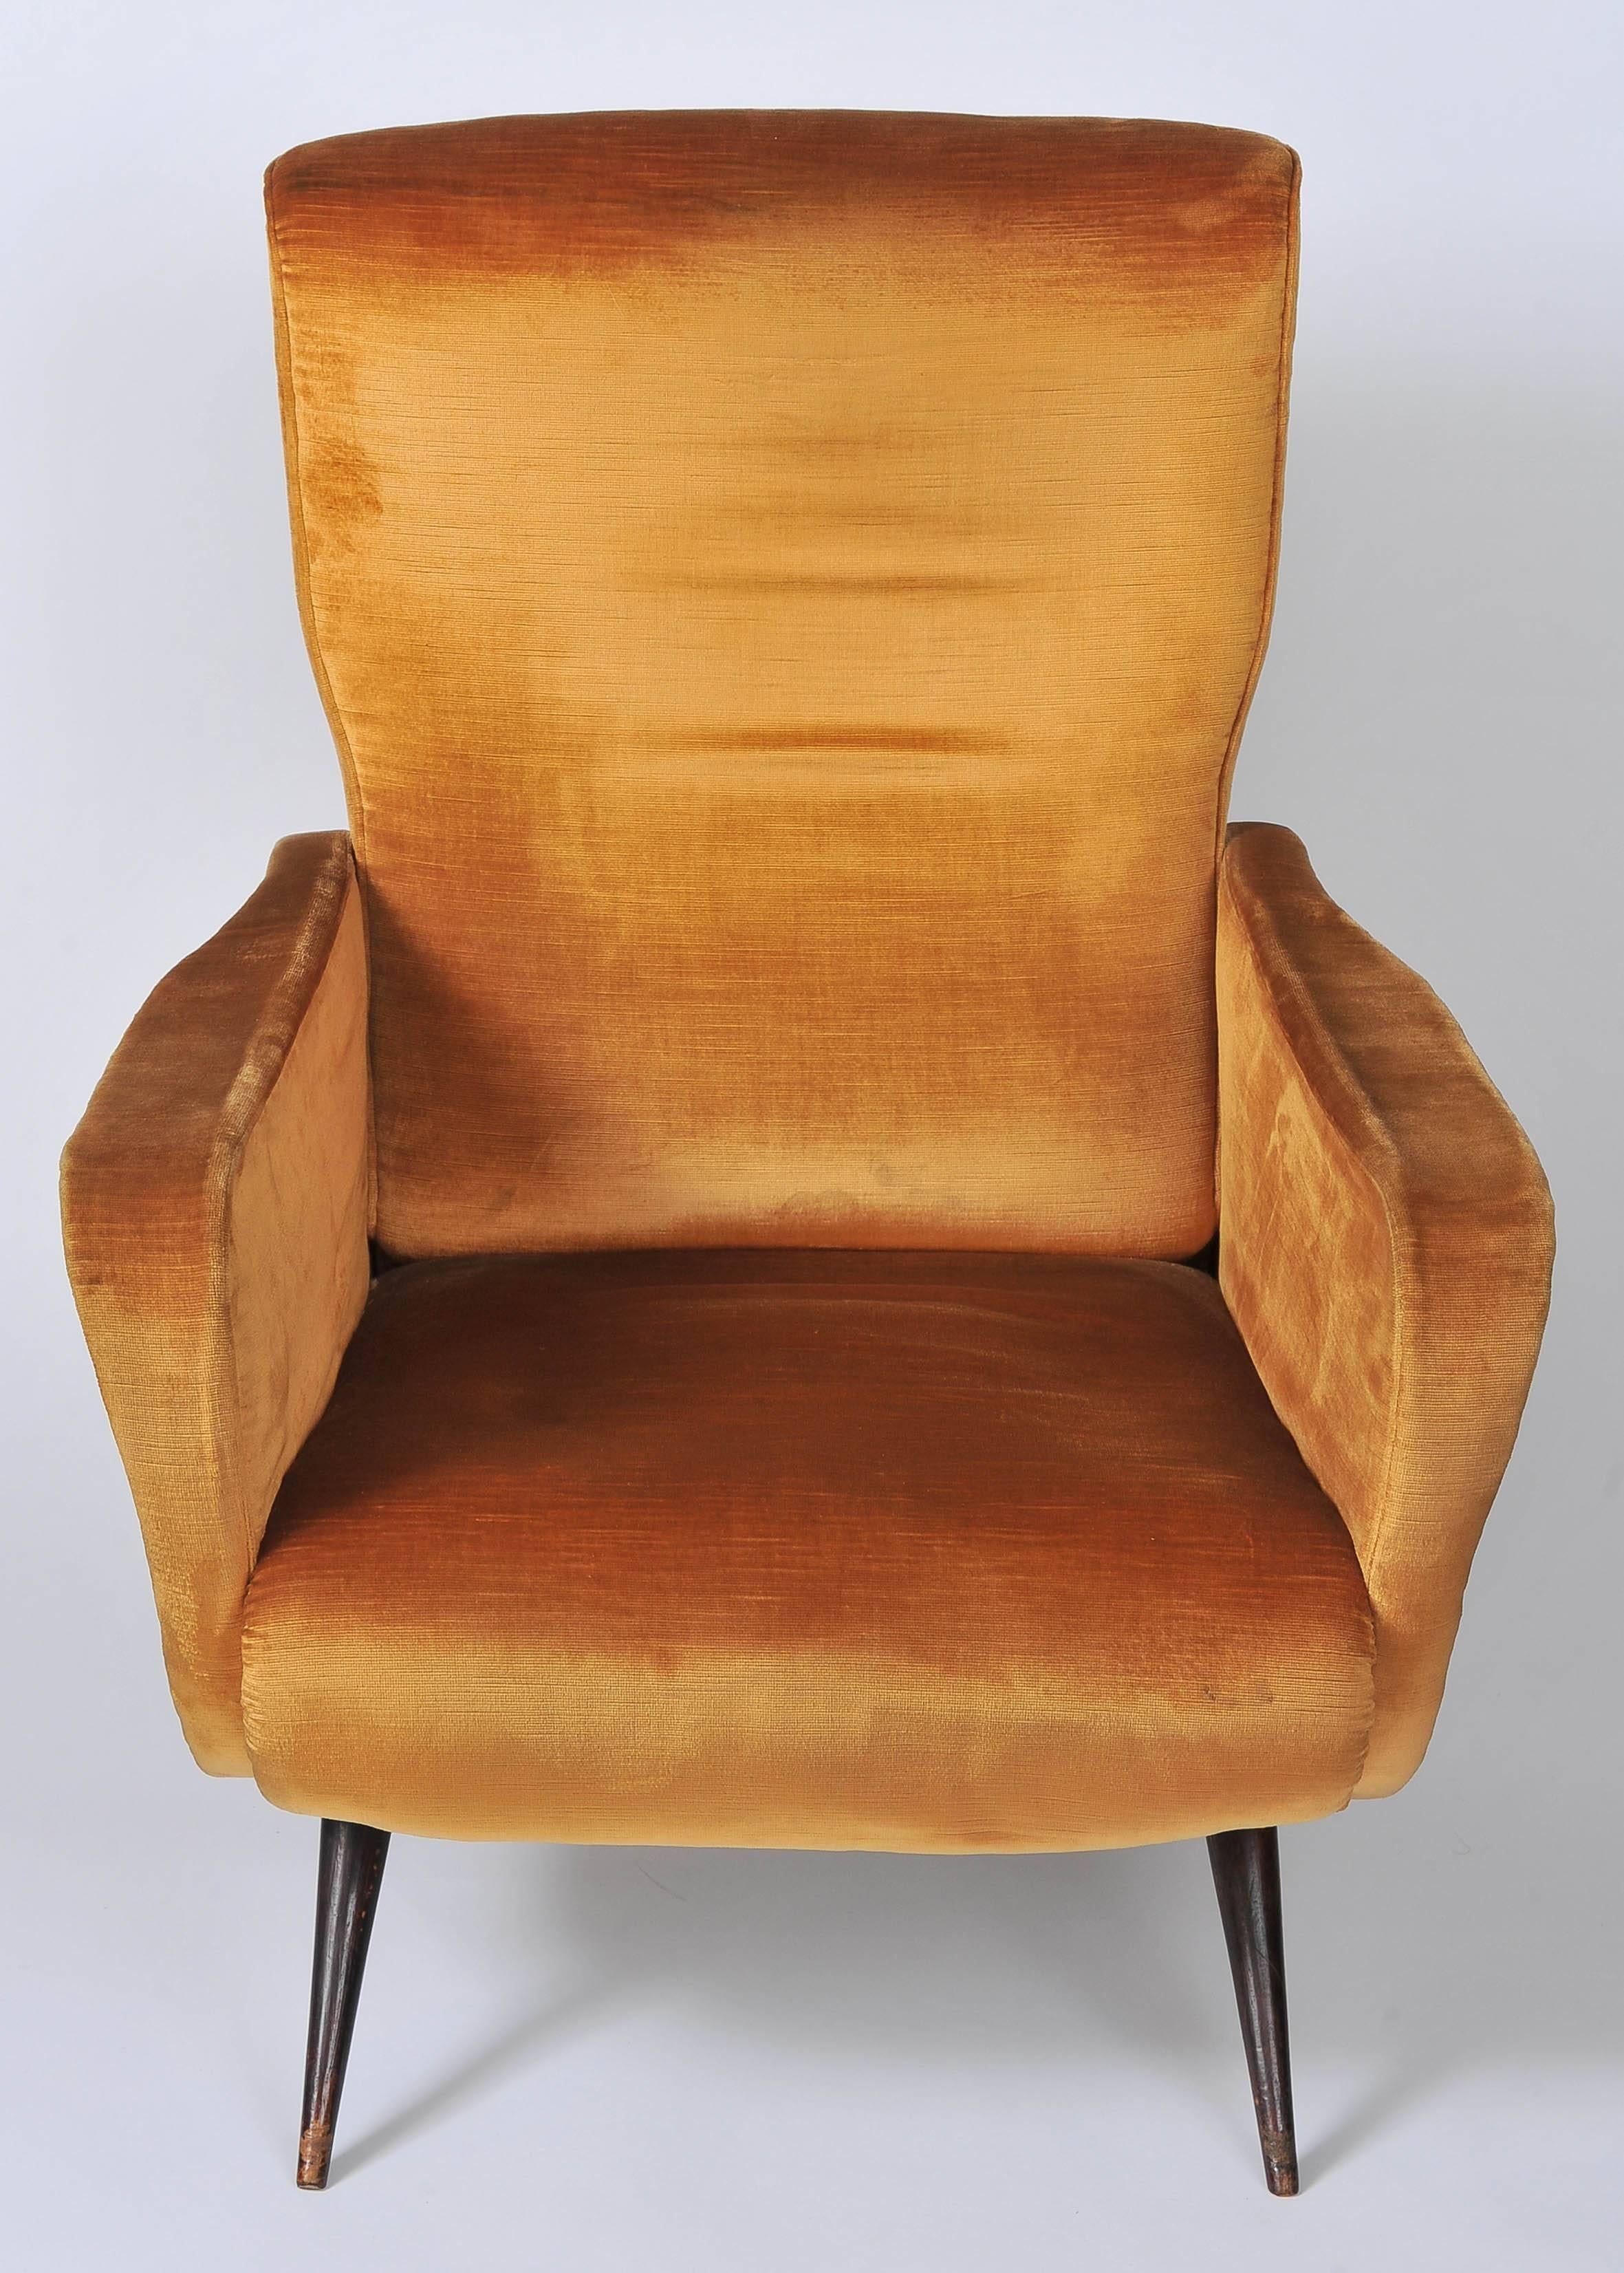 1950s reclinable armchairs by Nino Zoncada still in the original fabric.